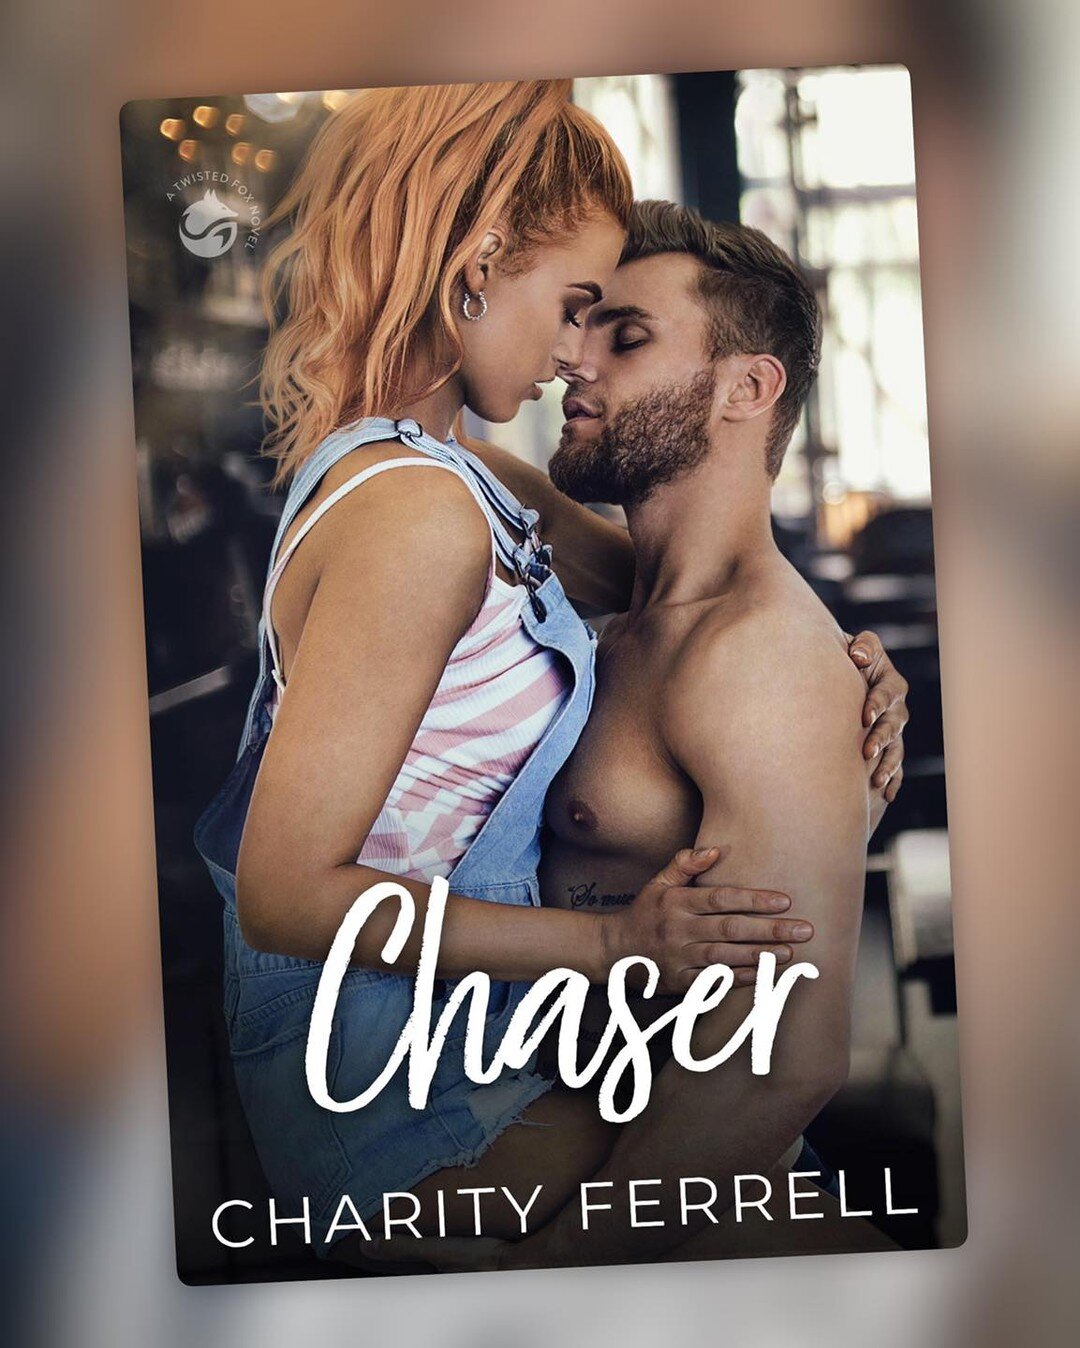 @charityferrell  has revealed the cover to her next book! We love this....

CHASER is coming May 18!

GRACE:

Things I never thought would happen:

1. Meeting my boyfriend&rsquo;s secret wife.

2. Finding out I&rsquo;m pregnant with his baby.

3. Hav